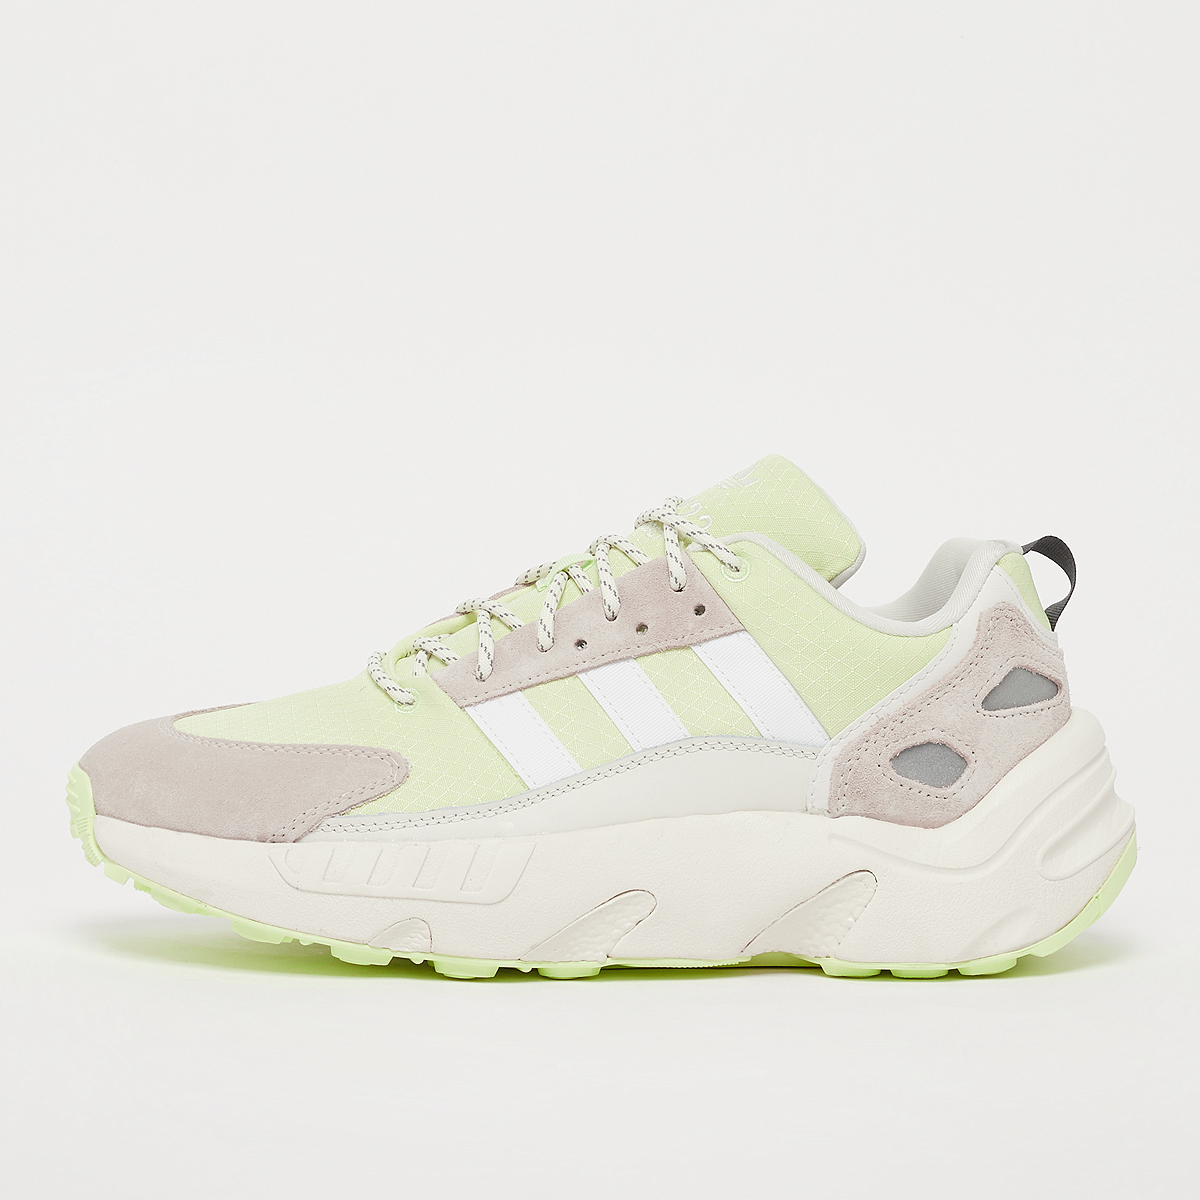 Sneaker ZX 22 BOOST, adidas Originals, Footwear, off white/ftwr white/pulse lime, taille: 42